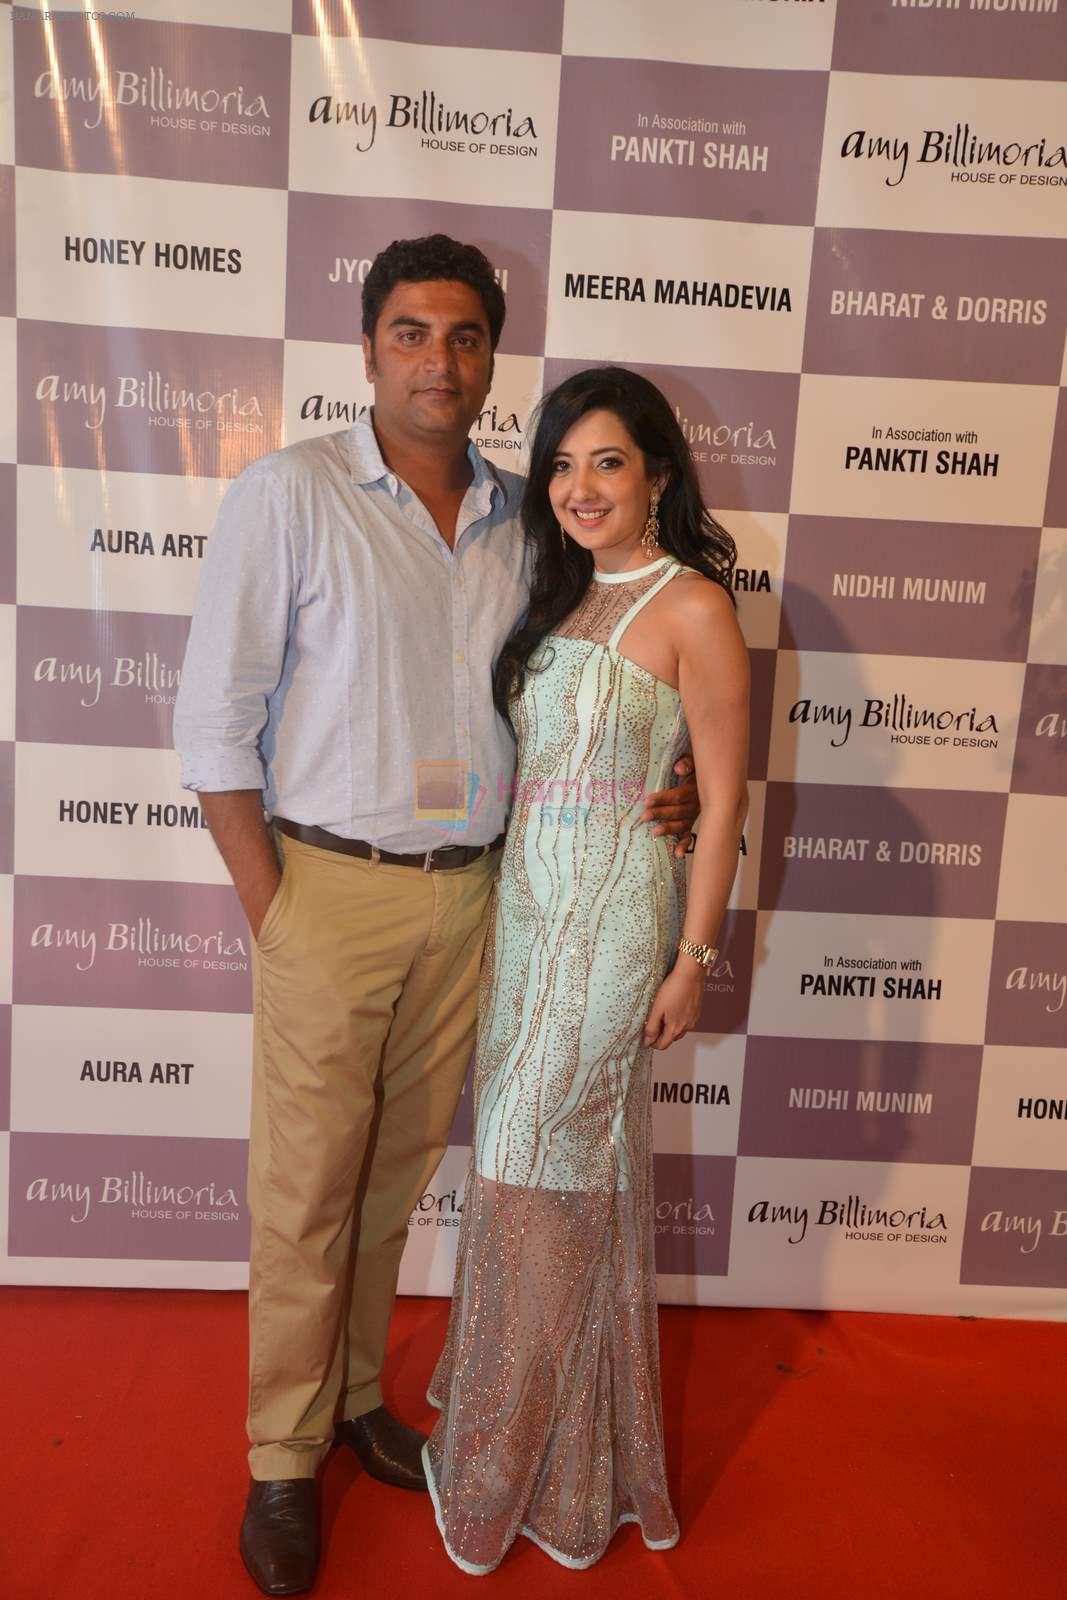 Amy at the launch of Amy Billimoria and Pankti Shah's store launch in Juhu, Mumbai on 7th May 2015